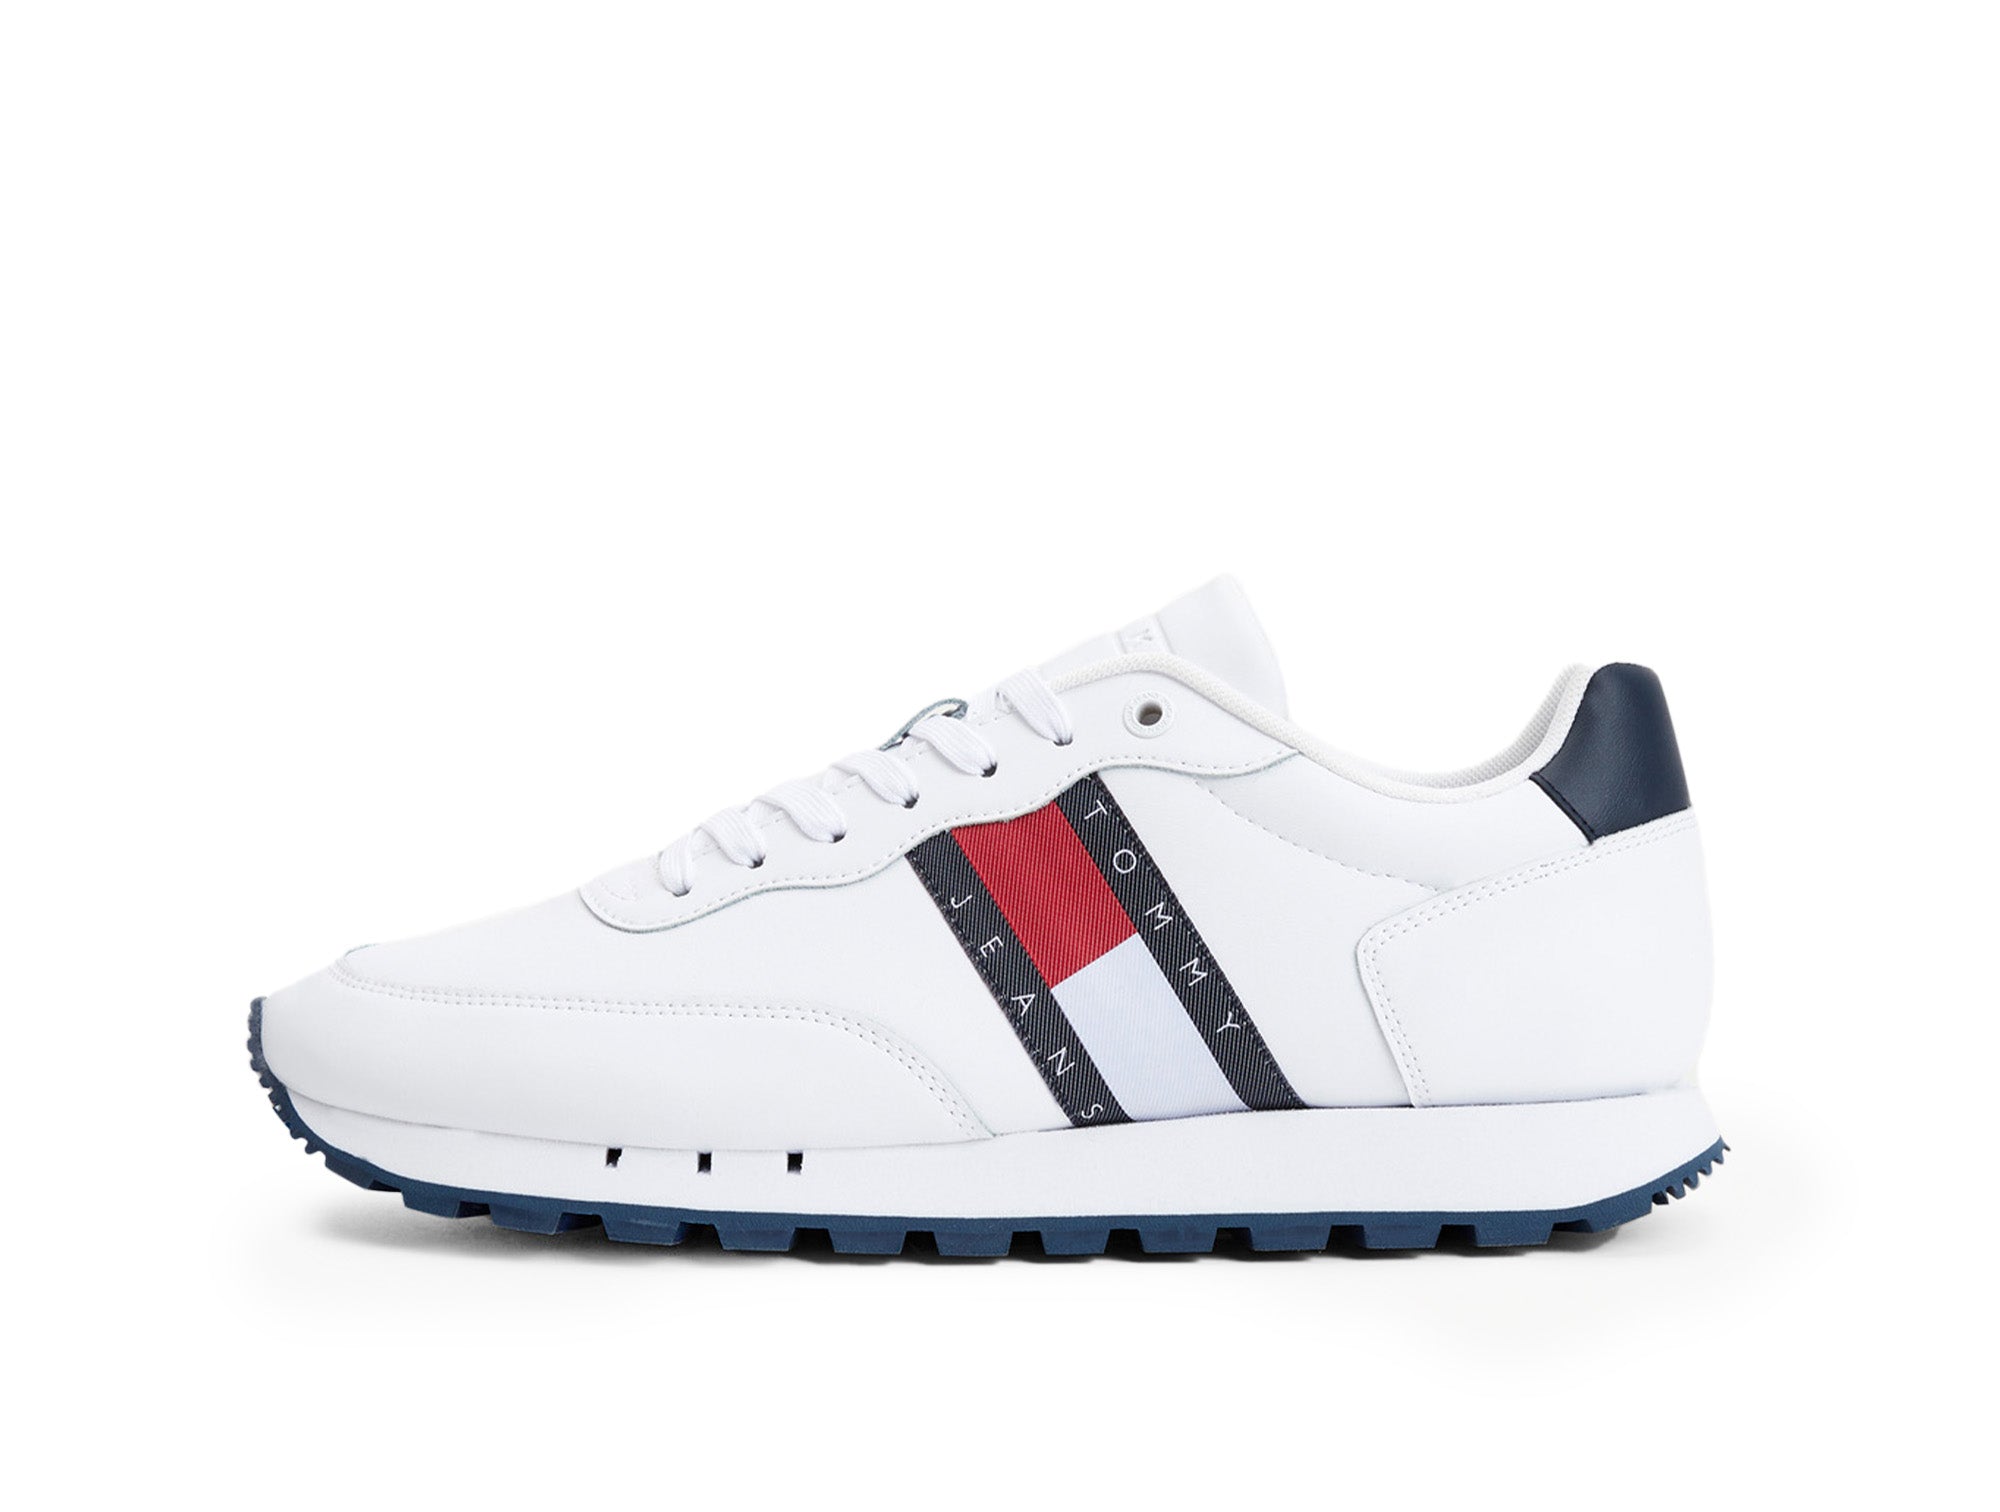 Zapatilla Tommy Leather Runner Hombre Blanco